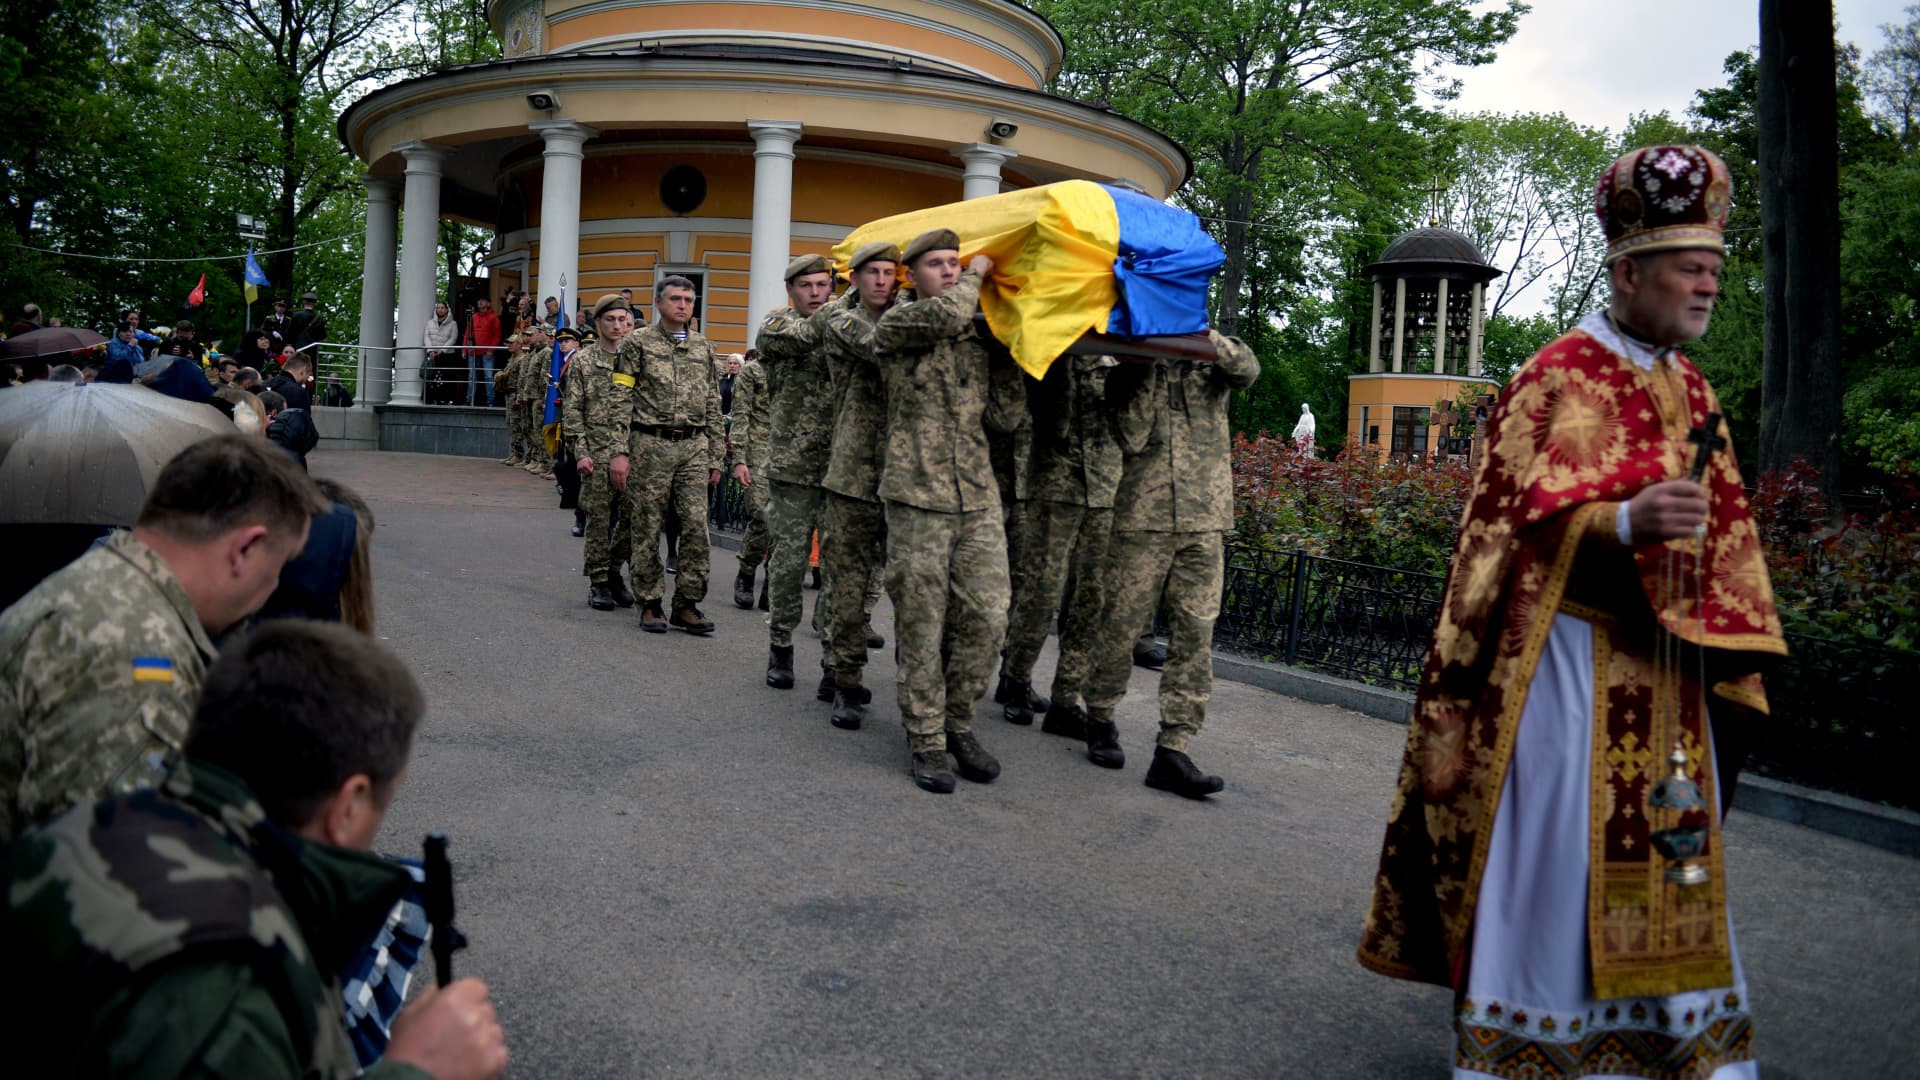 Servicemen carrying the coffin with the body of 95th Separate Air Assault Brigade officer, Lt Denys Antipov who perished while defending Ukraine's territorial integrity and independence from Russian invaders near Dovhenke village, Kharkiv Region, follow a priest outside St Nicholas' Church in Askold's Grave Park, Kyiv, capital of Ukraine.